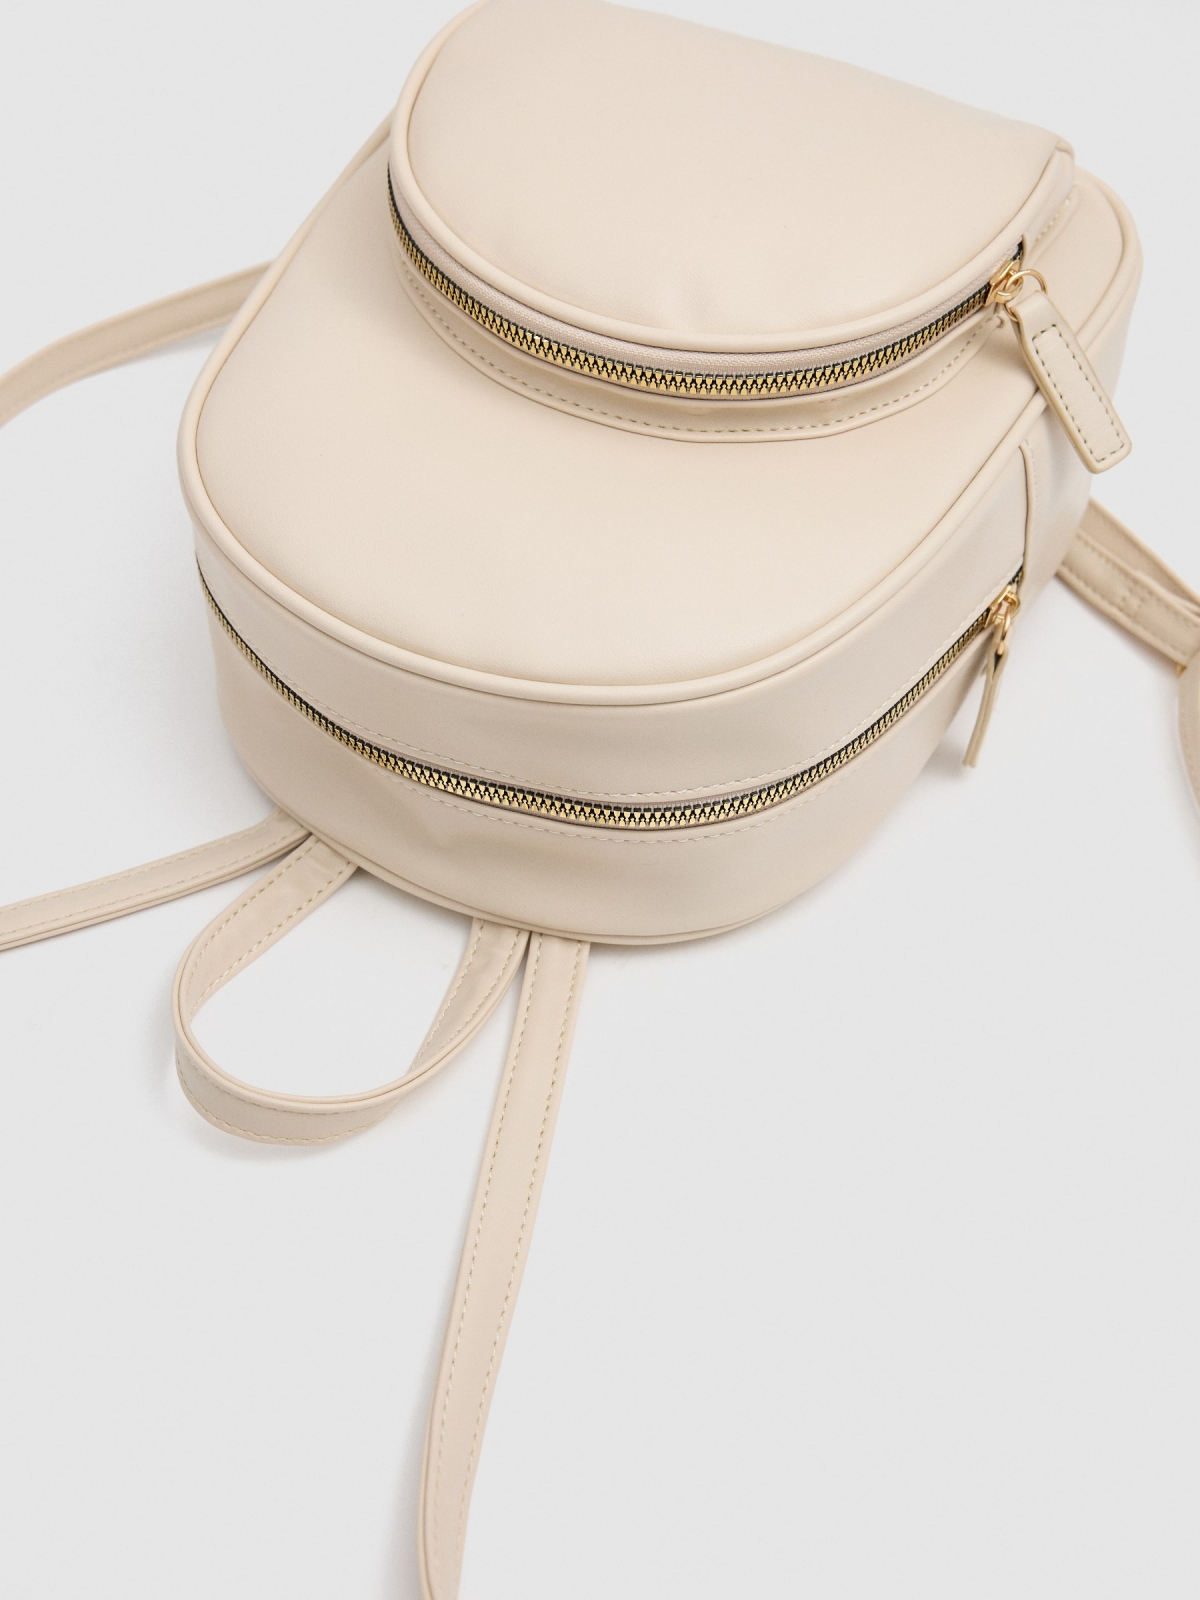 Leatherette backpack white detail view